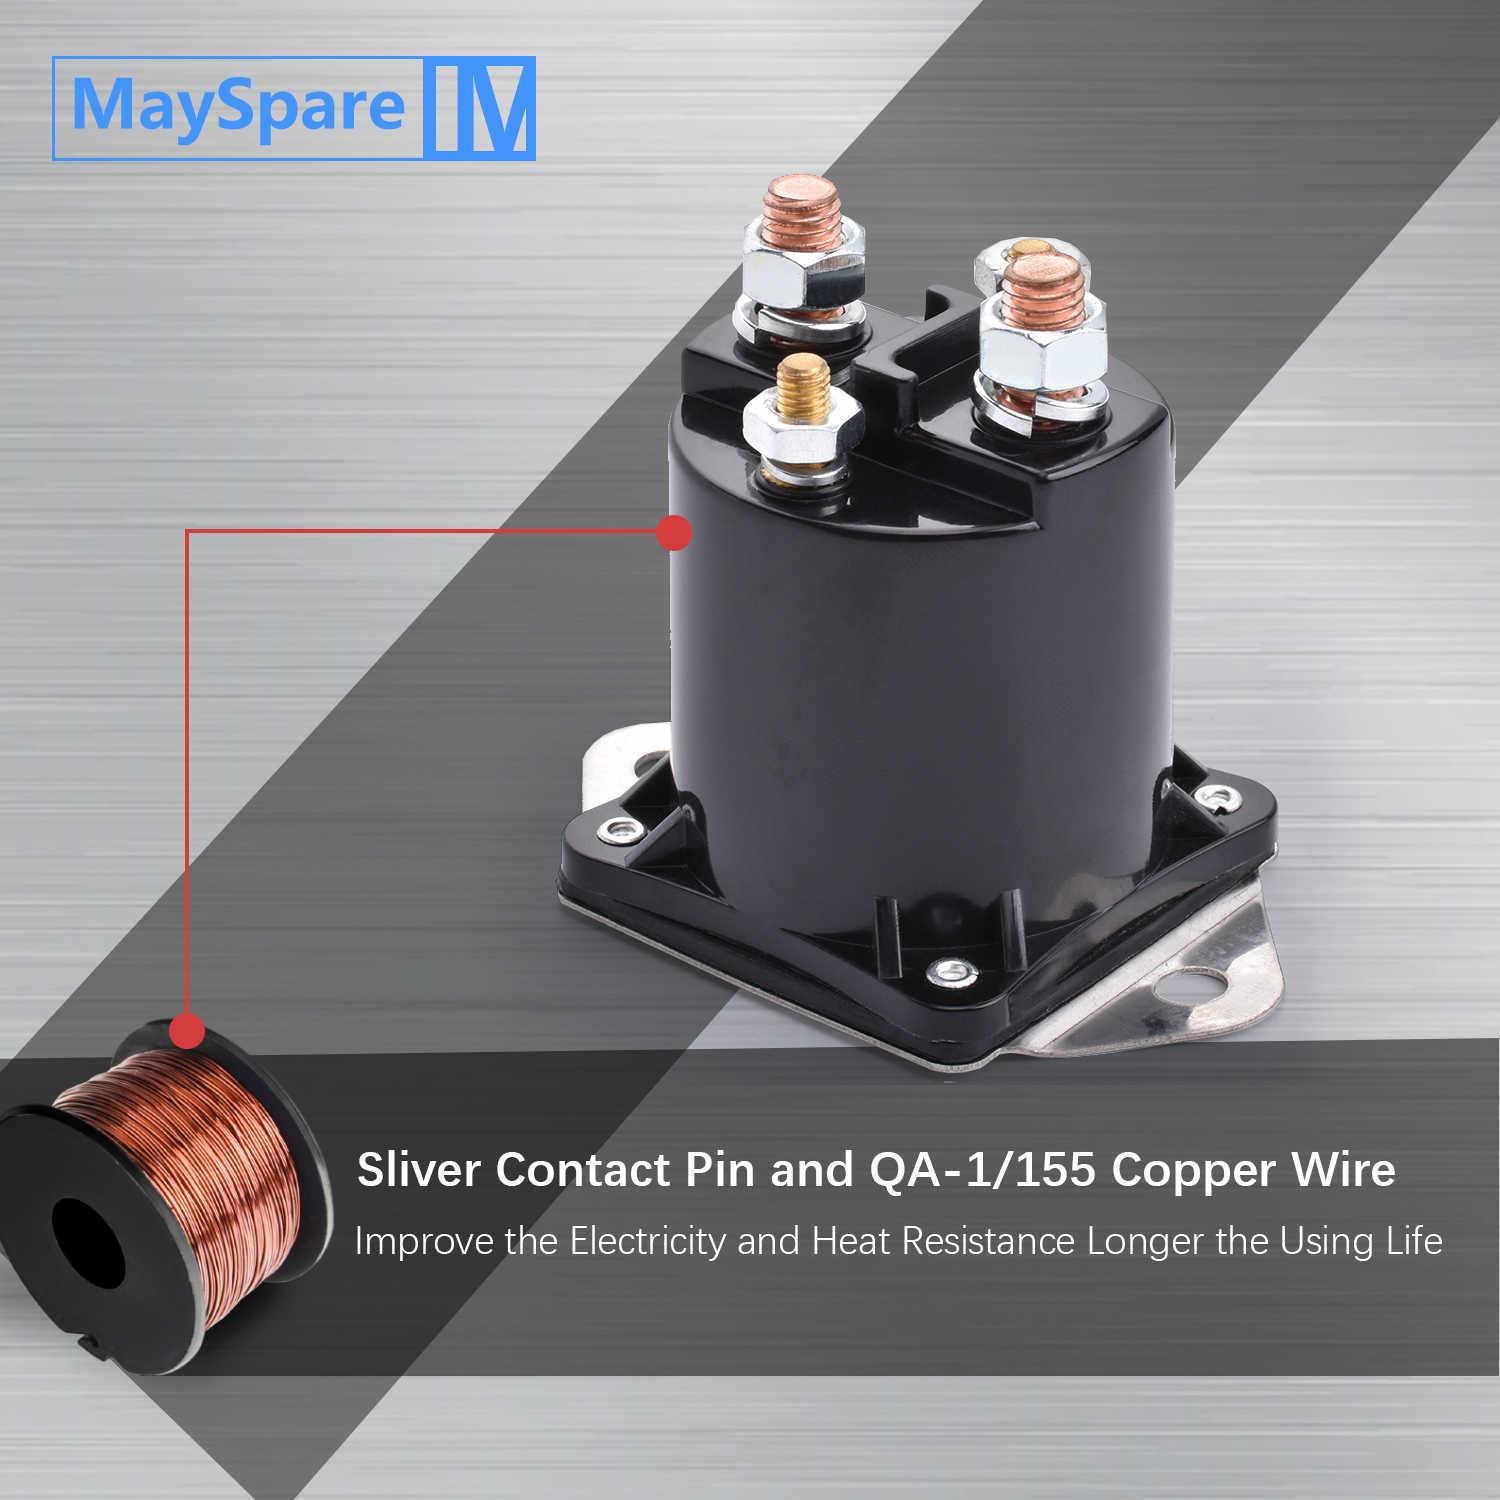 Relays use high quality copper coils